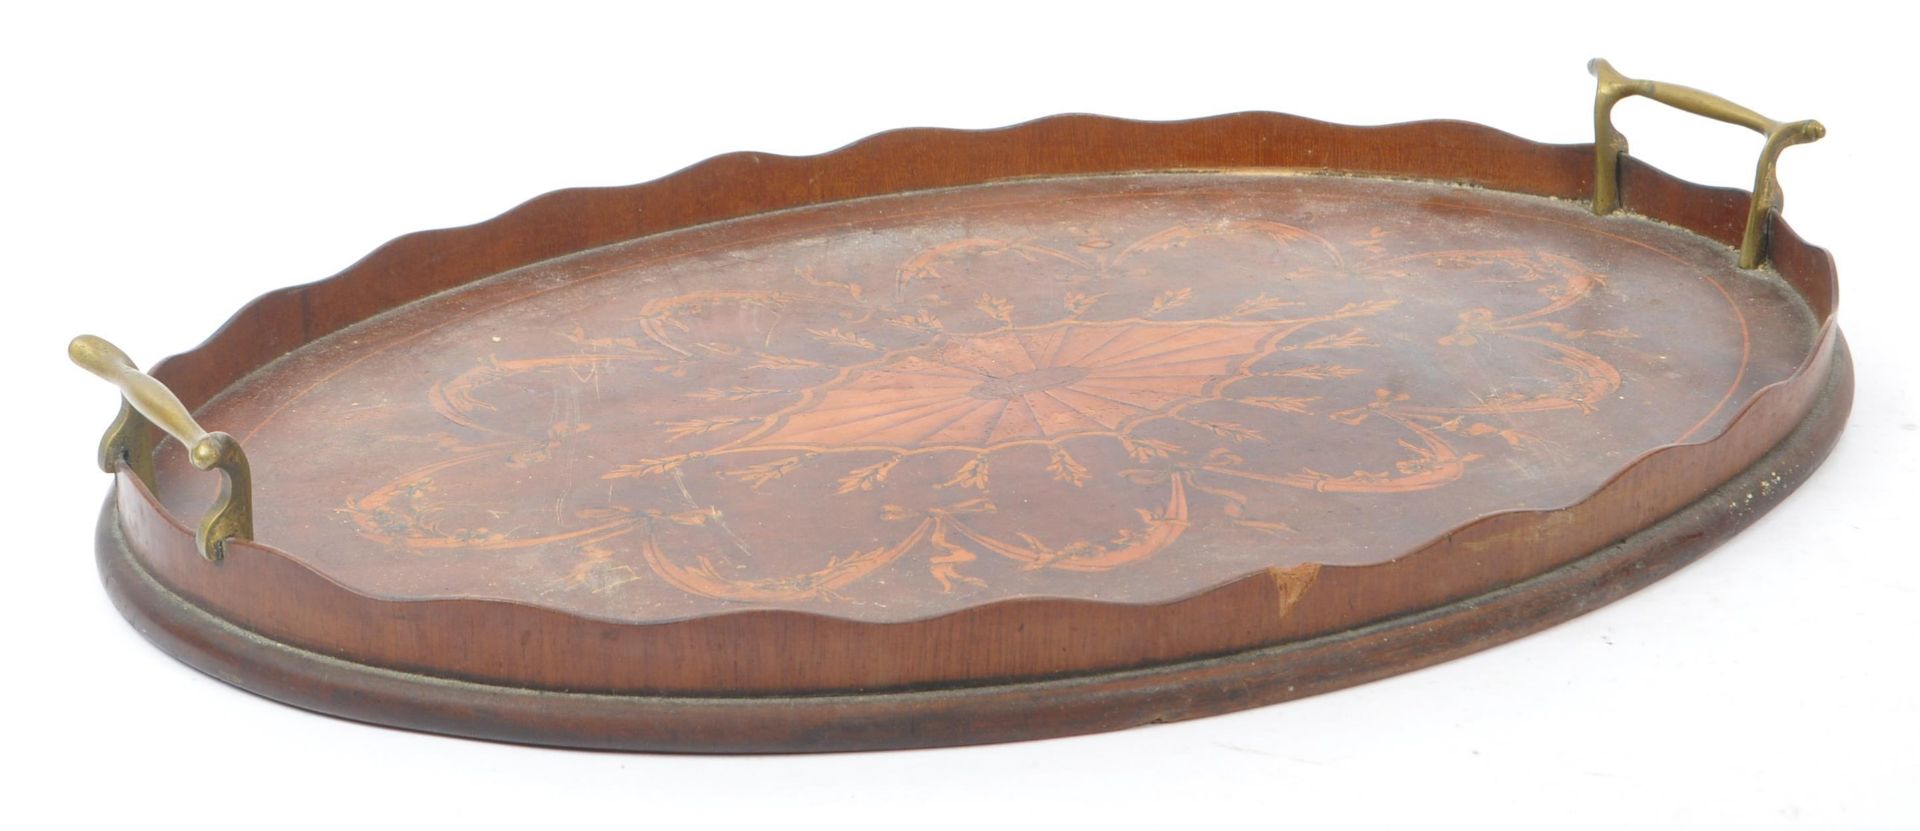 EARLY 20TH CENTURY INLAID TRAY WITH GOTHIC BOX - Image 3 of 9